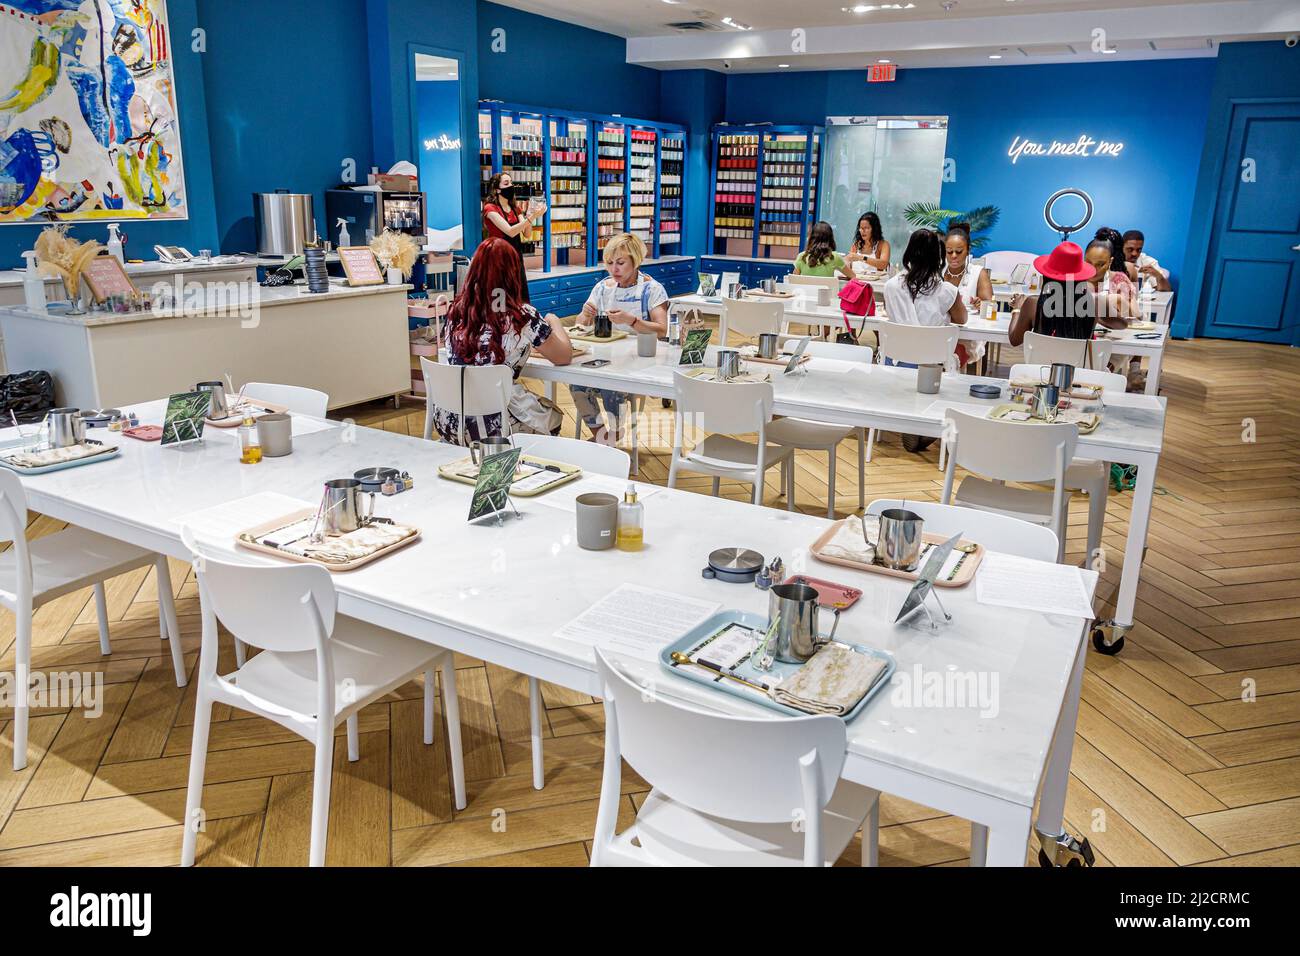 Miami Beach Florida Lincoln Road Pedestrian Mall Candle Land candle making class inside interior Stock Photo